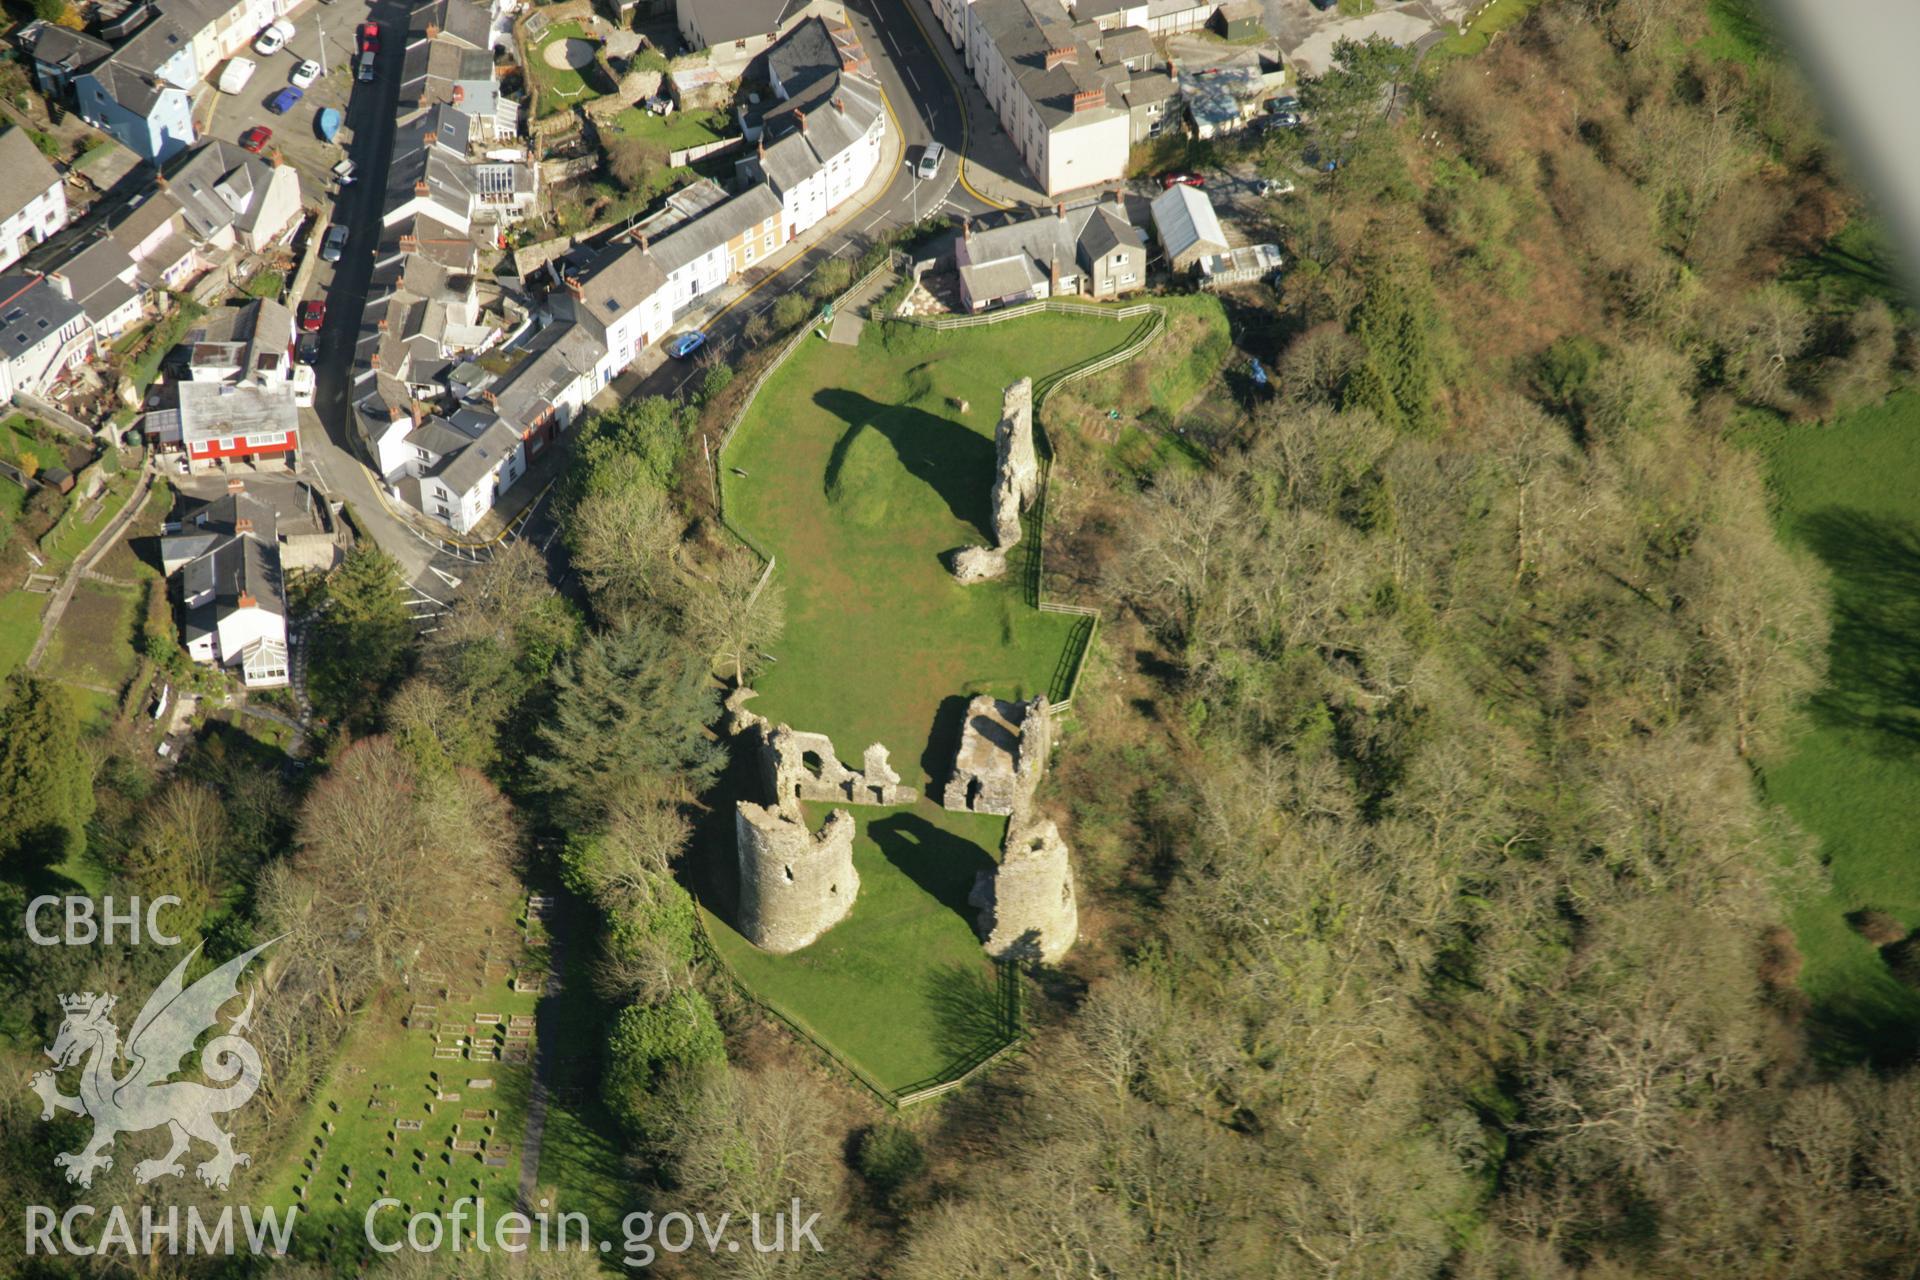 RCAHMW colour oblique aerial photograph of Narberth Castle. Taken on 21 March 2007 by Toby Driver